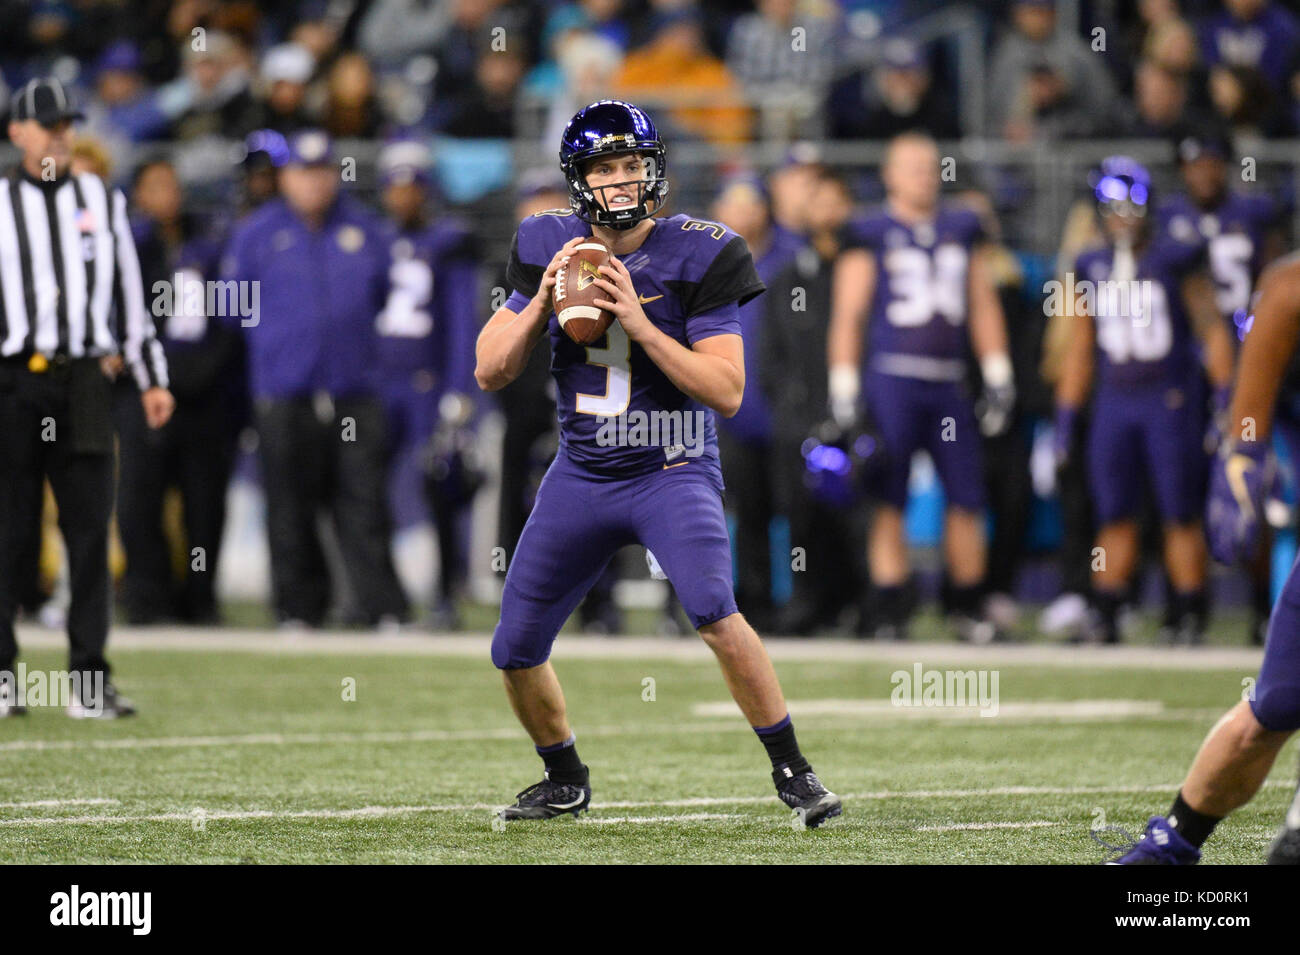 Seattle, WA, USA. 7th Oct, 2017. UW quarterback Jake Browning (3) looks down field during a PAC12 football game between the Cal Bears and the Washington Huskies. The game was played at Husky Stadium on the University of Washington campus in Seattle, WA. Jeff Halstead/CSM/Alamy Live News Stock Photo